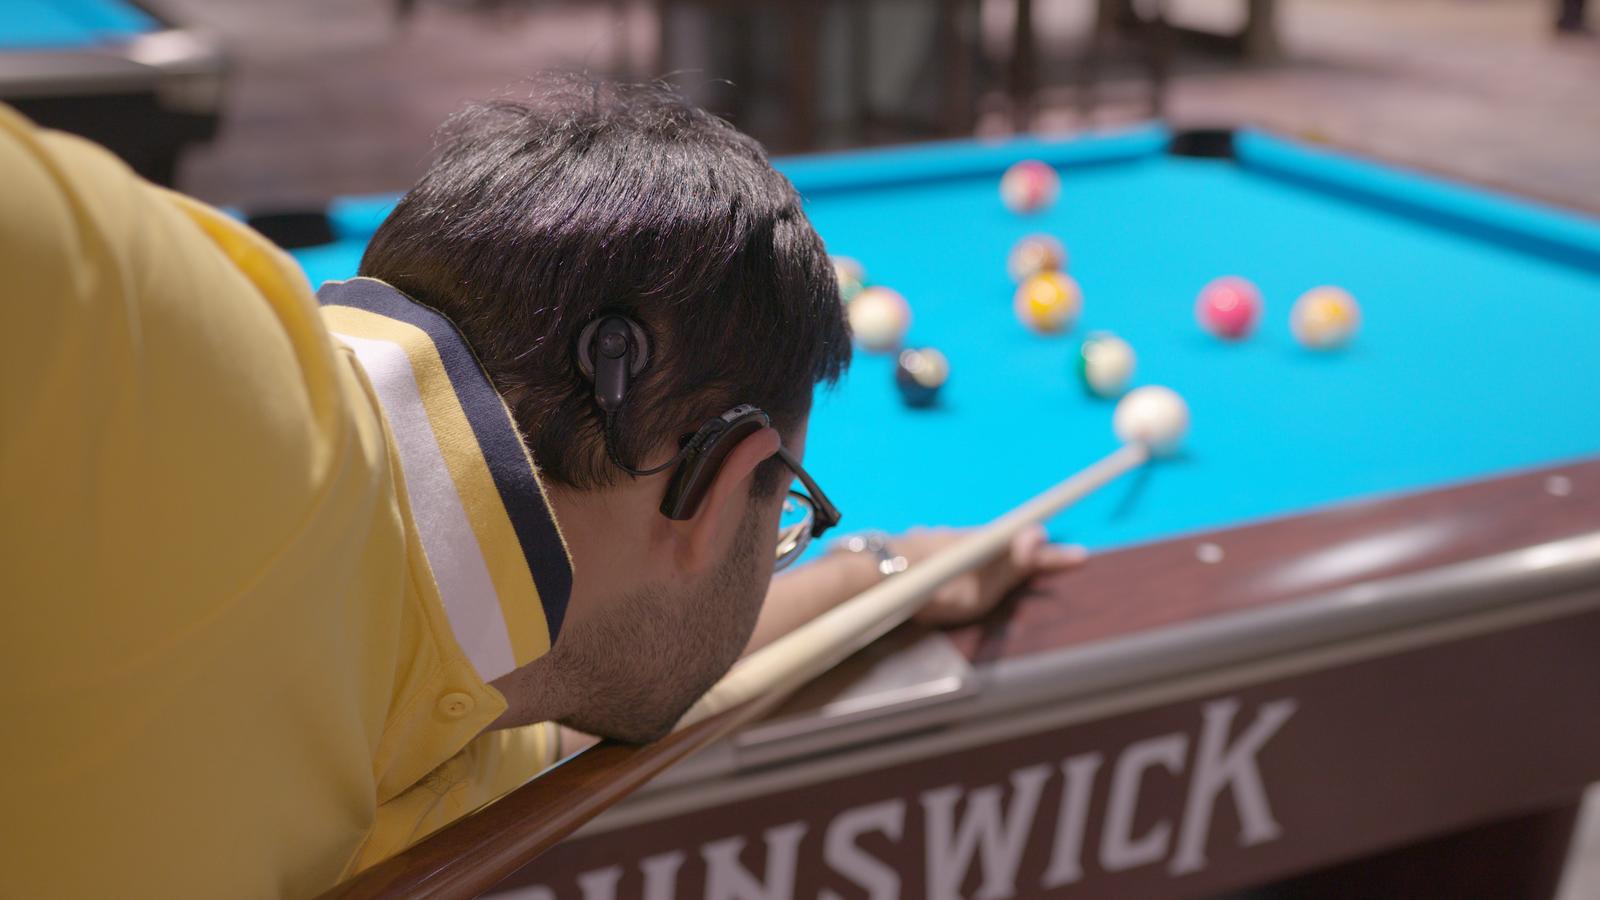 Adult man wearing an implant plays snooker